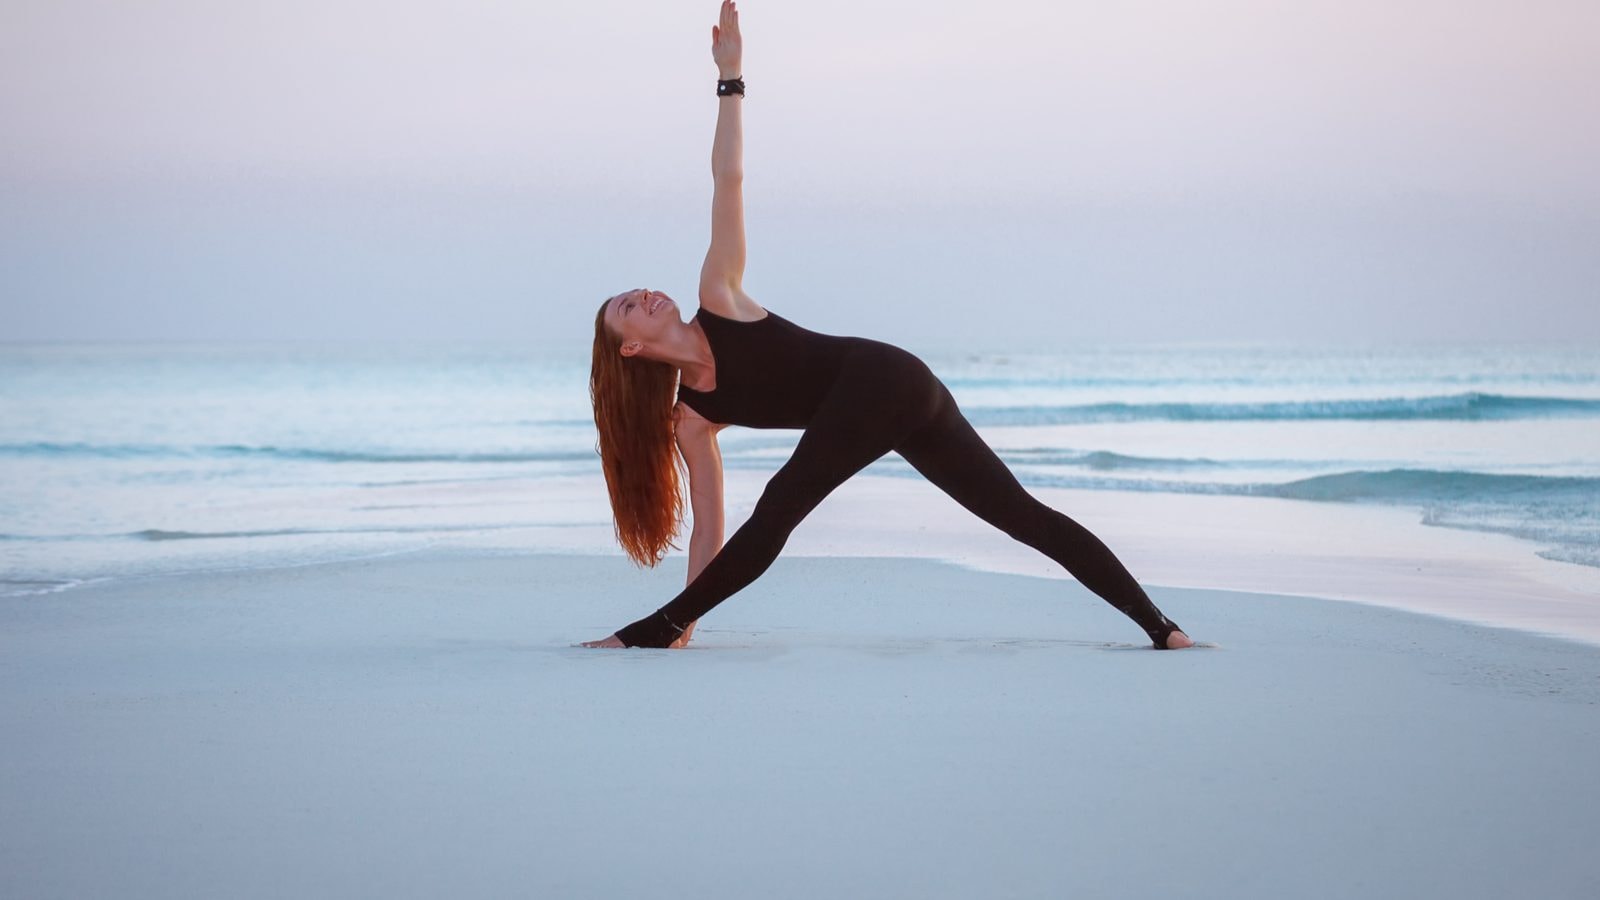 These 5 Yoga Asanas Can Increase Your Bone Density and Help Fight Osteoporosis